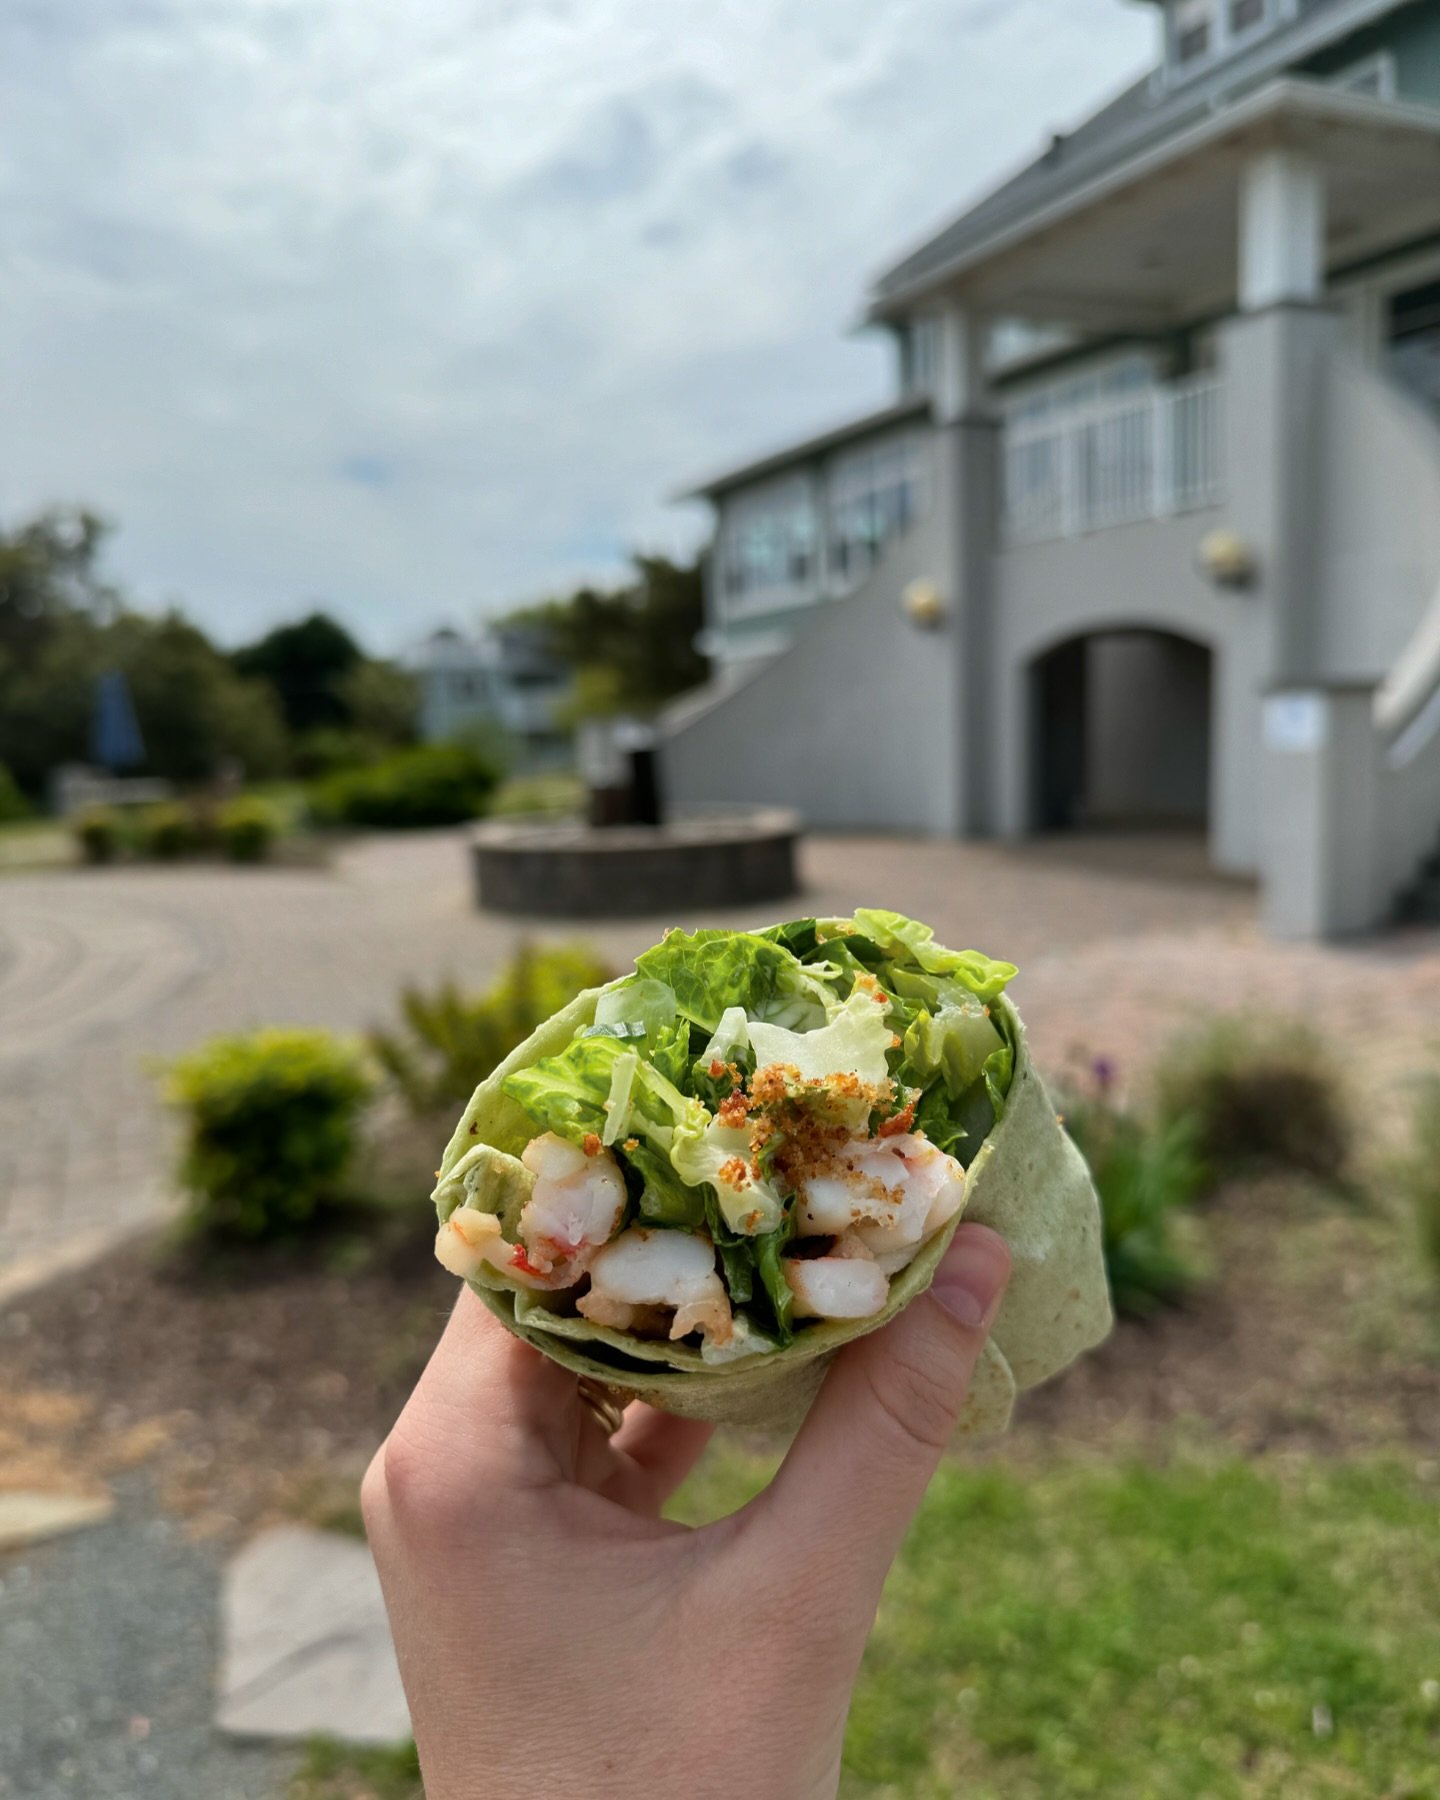 Our Shrimp Caesar Wrap is bursting with flavor and delicious texture 🦐✨

Reminder, we have new temporary hours: 11-3pm, Tuesday-Saturday! 

#dontforgettosaygraze #grazekitchenvb #757eats #757foodie